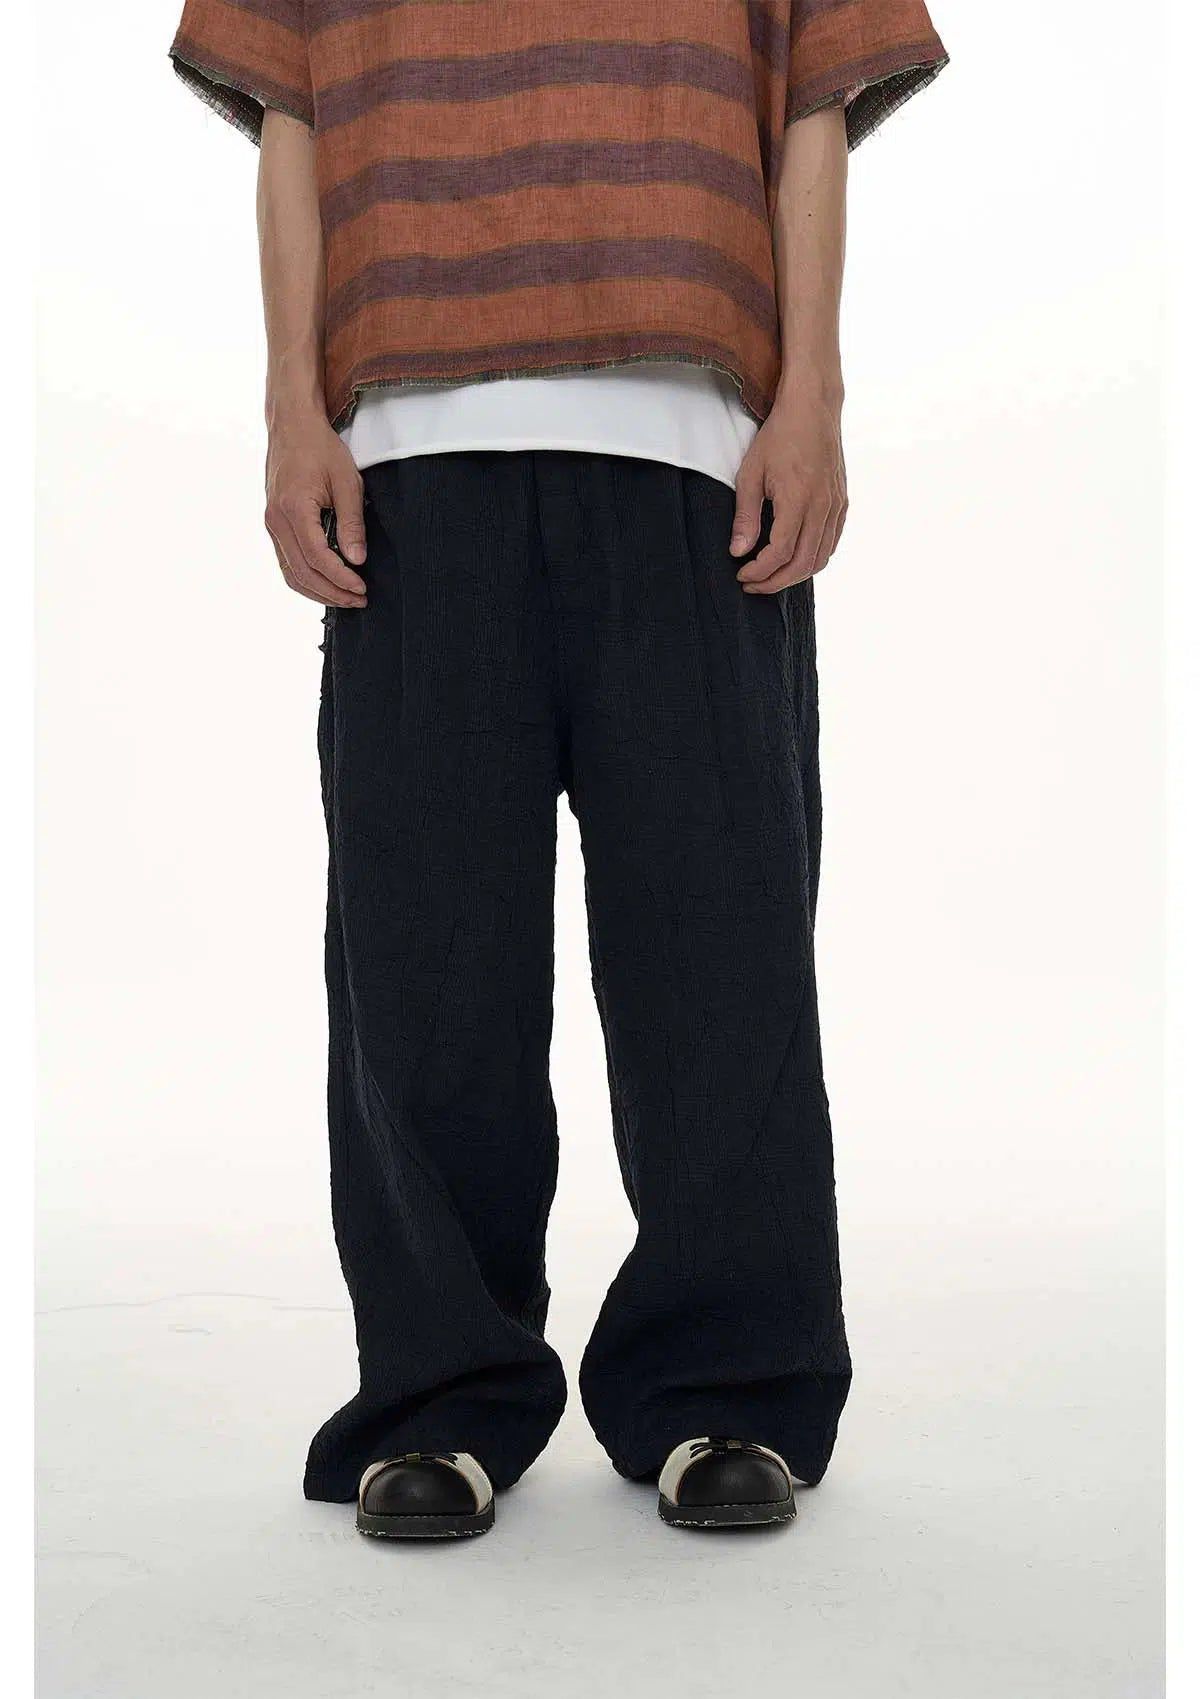 Textured Loose Fit Pants Korean Street Fashion Pants By ETERNITY ITA Shop Online at OH Vault